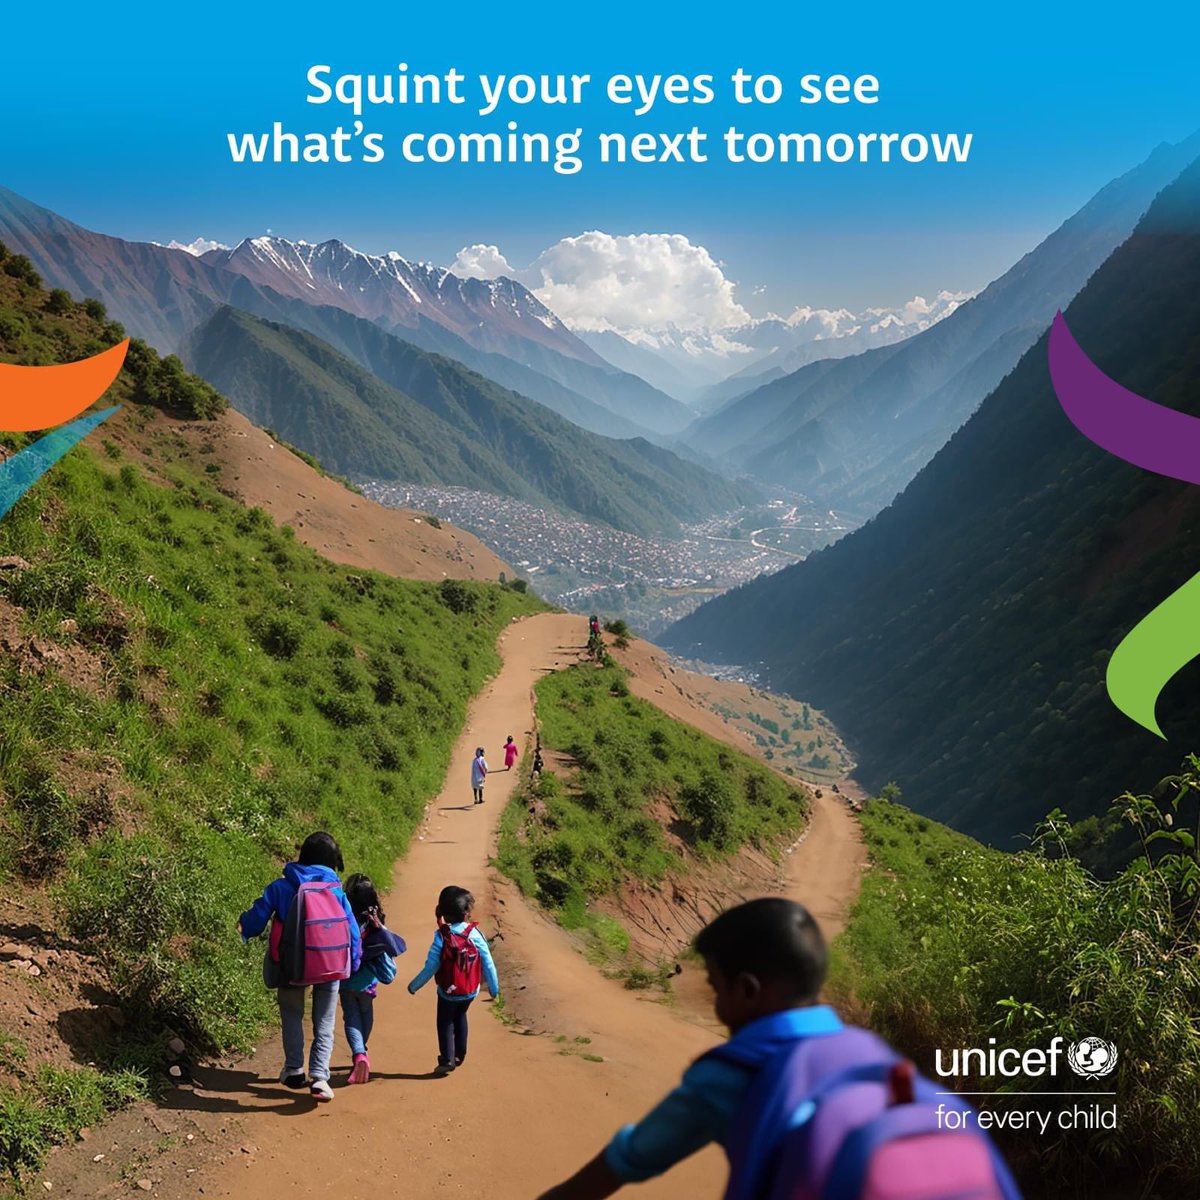 Tomorrow is a big day for UNICEF in India since it began its journey in 1949. UNICEF has been an integral part of the Govt. of India's development and humanitarian efforts, especially for children. Don’t forget to squint to get a sneak peek for tomorrow. #ForEveryChild, every…